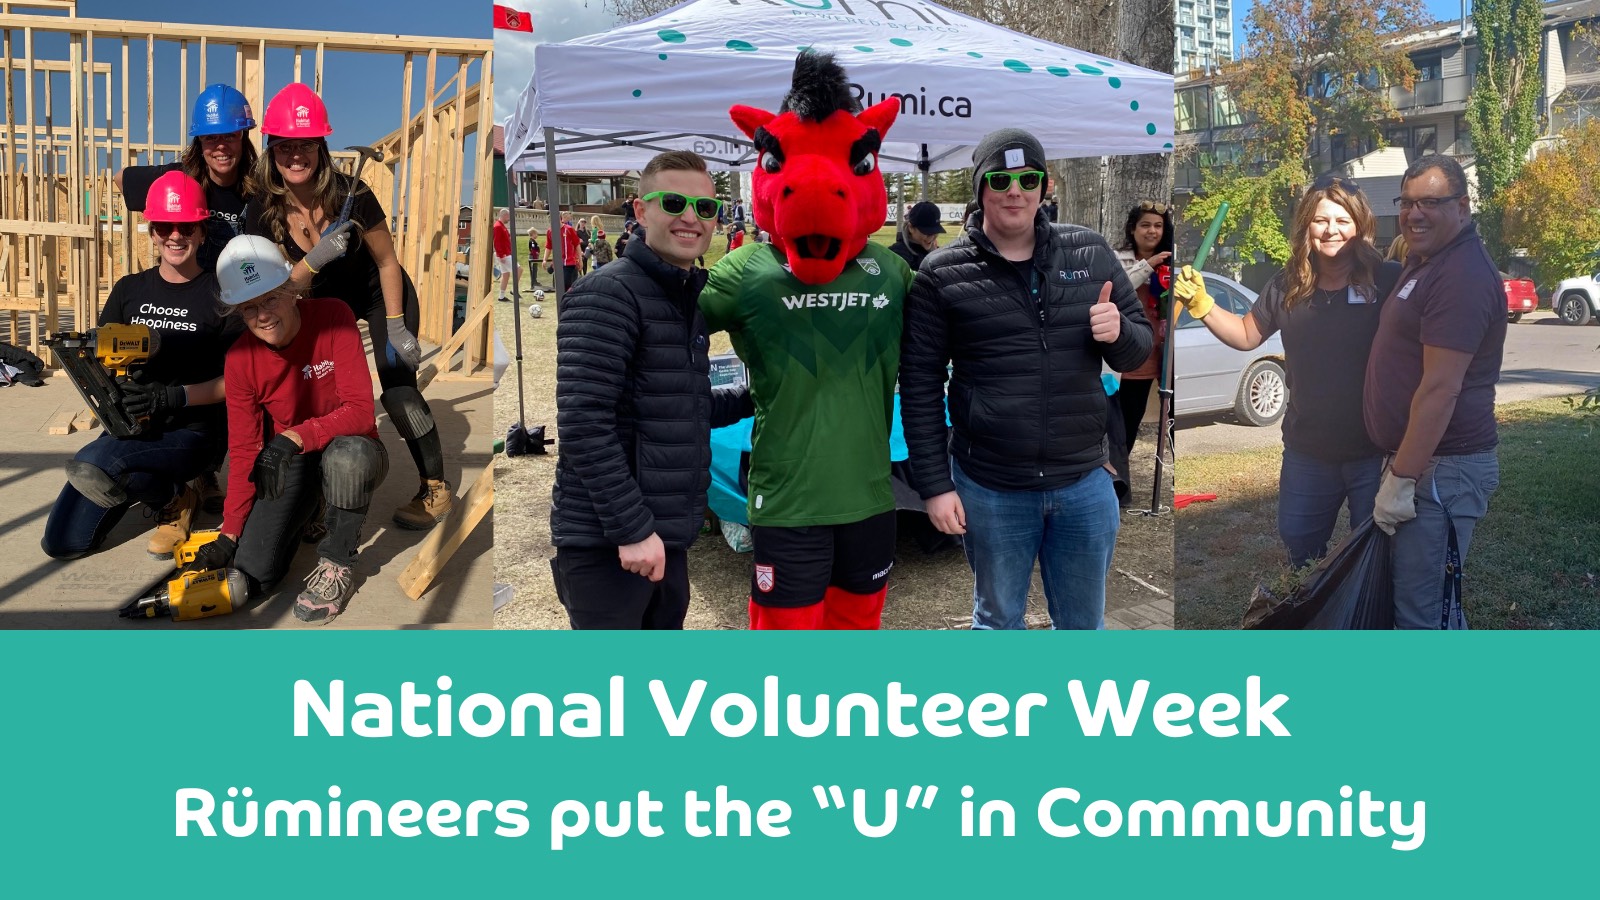 Rümineers embody the values of Caring, Collaboration, Agility, Integrity & Safety by volunteering in the community. Learn how we're helping to make a difference!